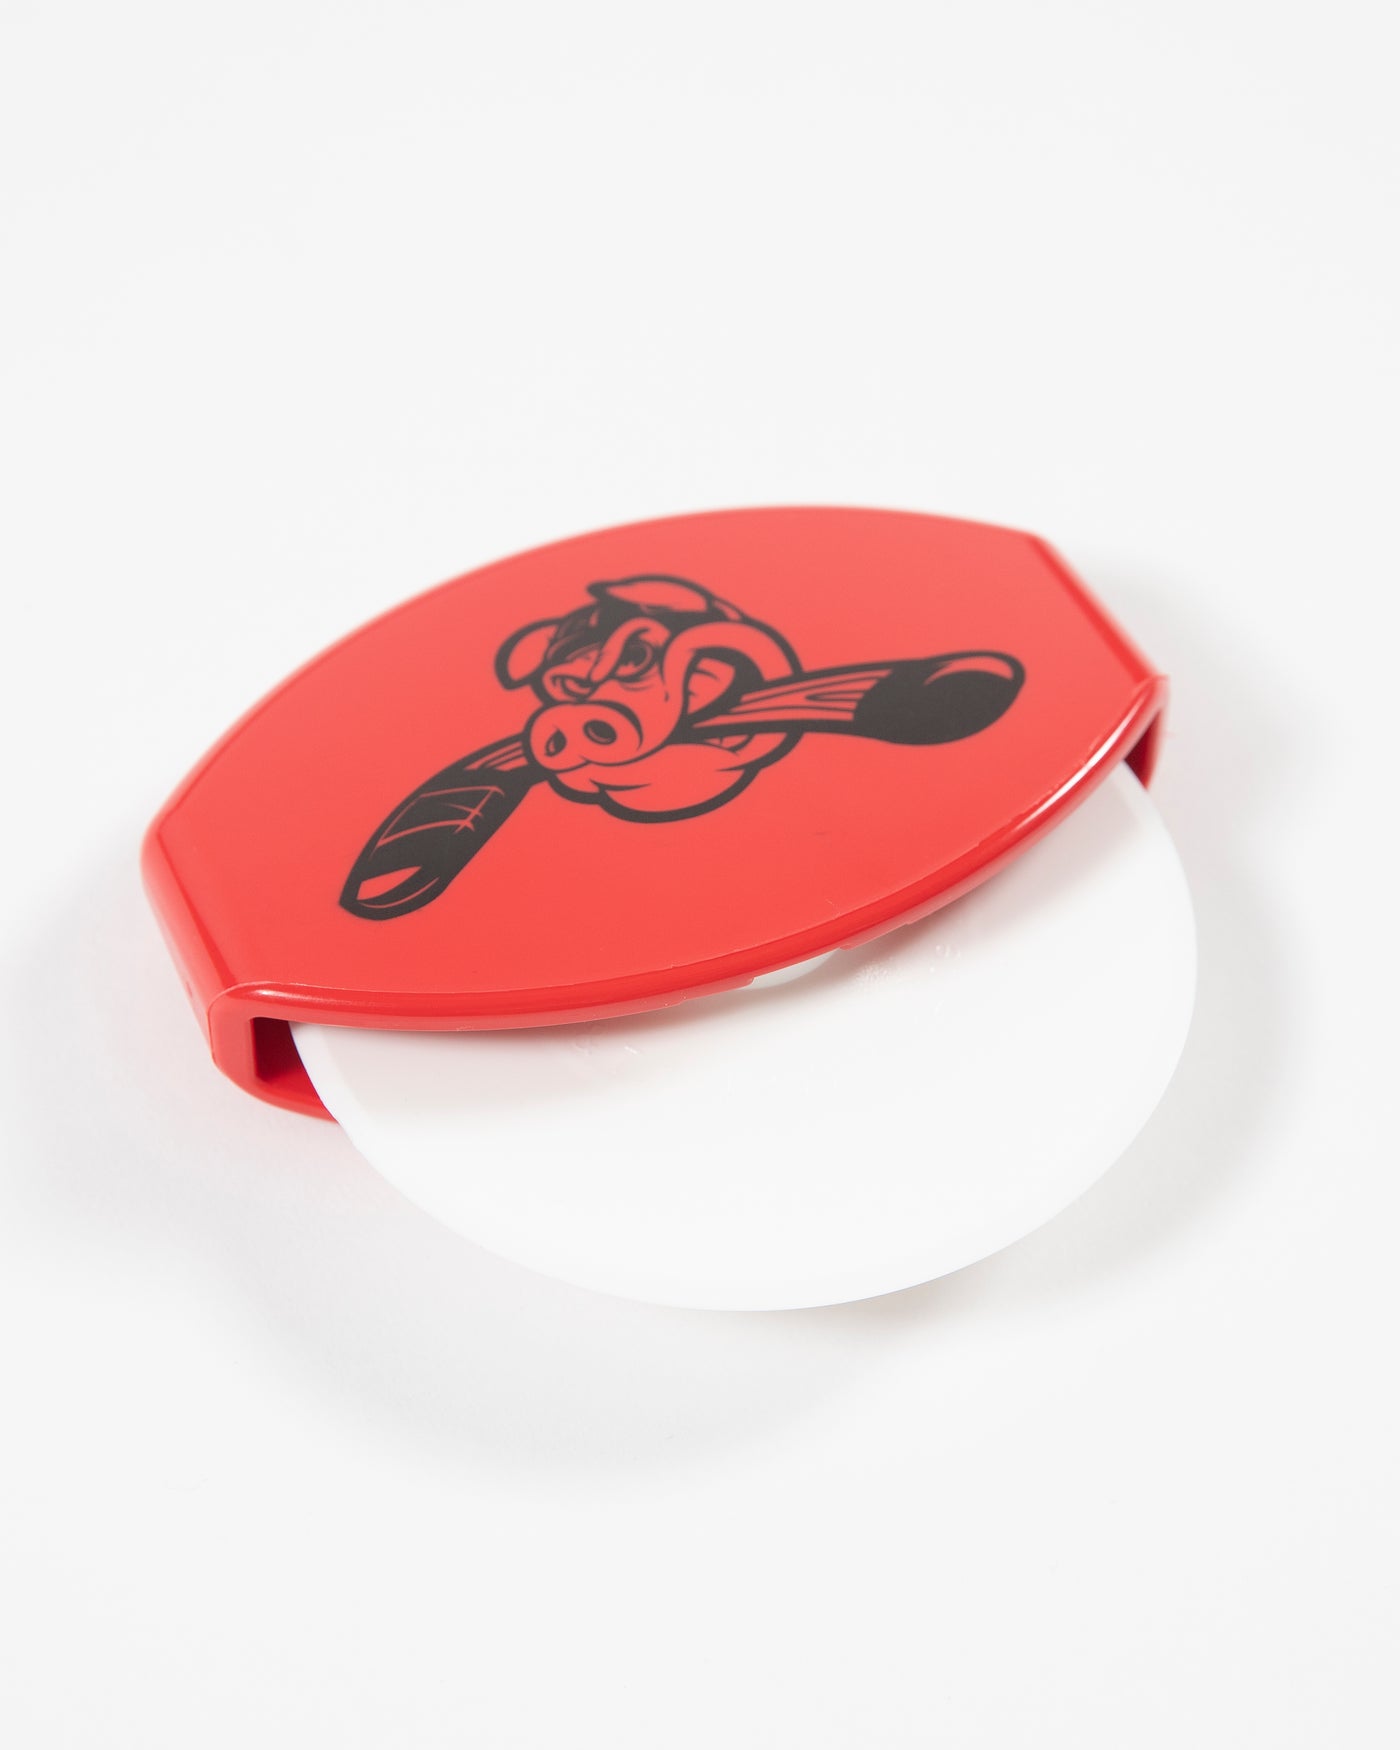 White and red plastic pizza cutter with Rockford IceHogs Hammy logo on front - angled lay flat